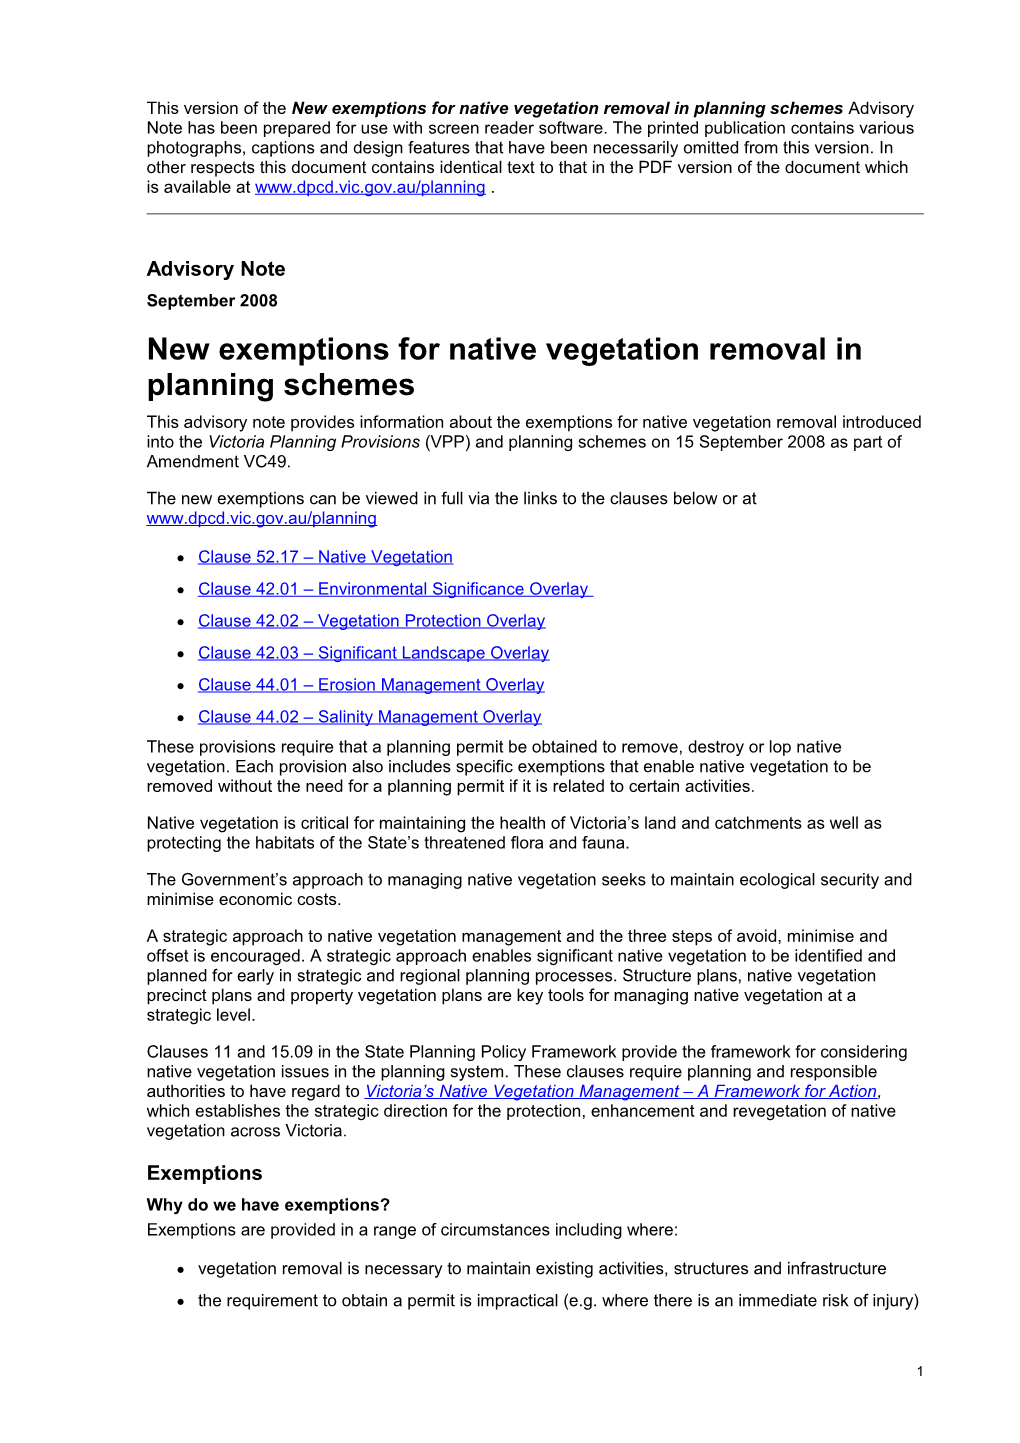 New Exemptions for Native Vegetation Removal in Planning Schemes Advisory Note